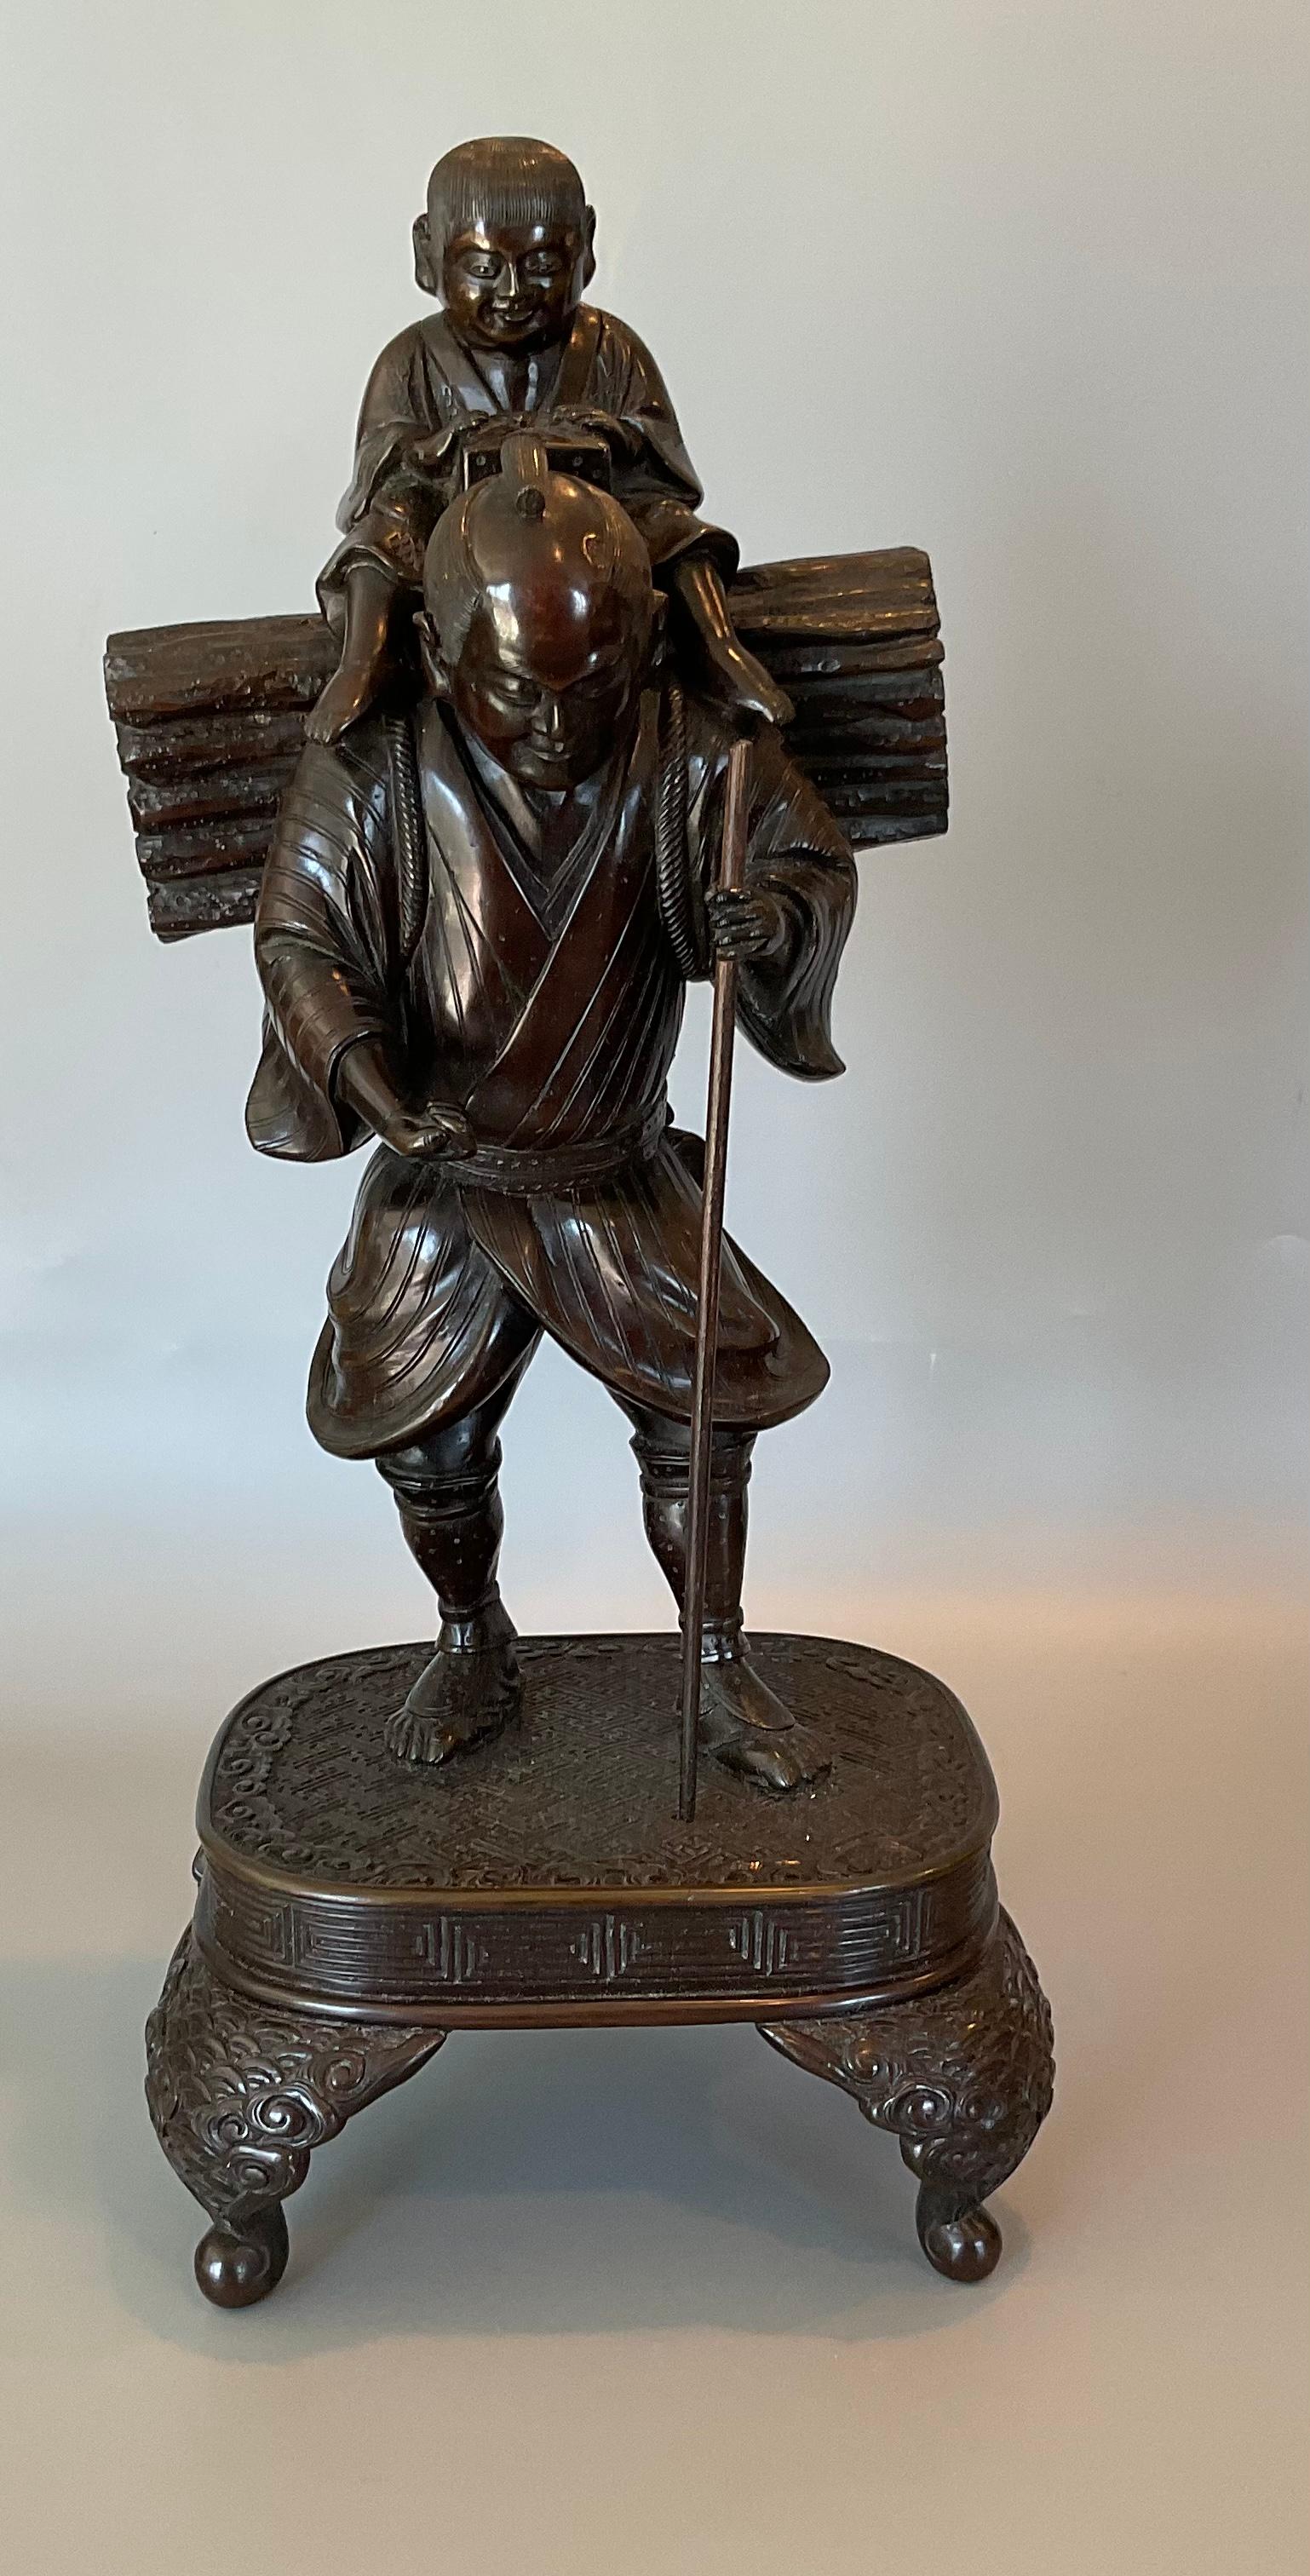 Pair Meiji Period bronze figural hiking family sculptures with incredible detail on the sculptures and on the stand. Incredible original patina. Very well made.